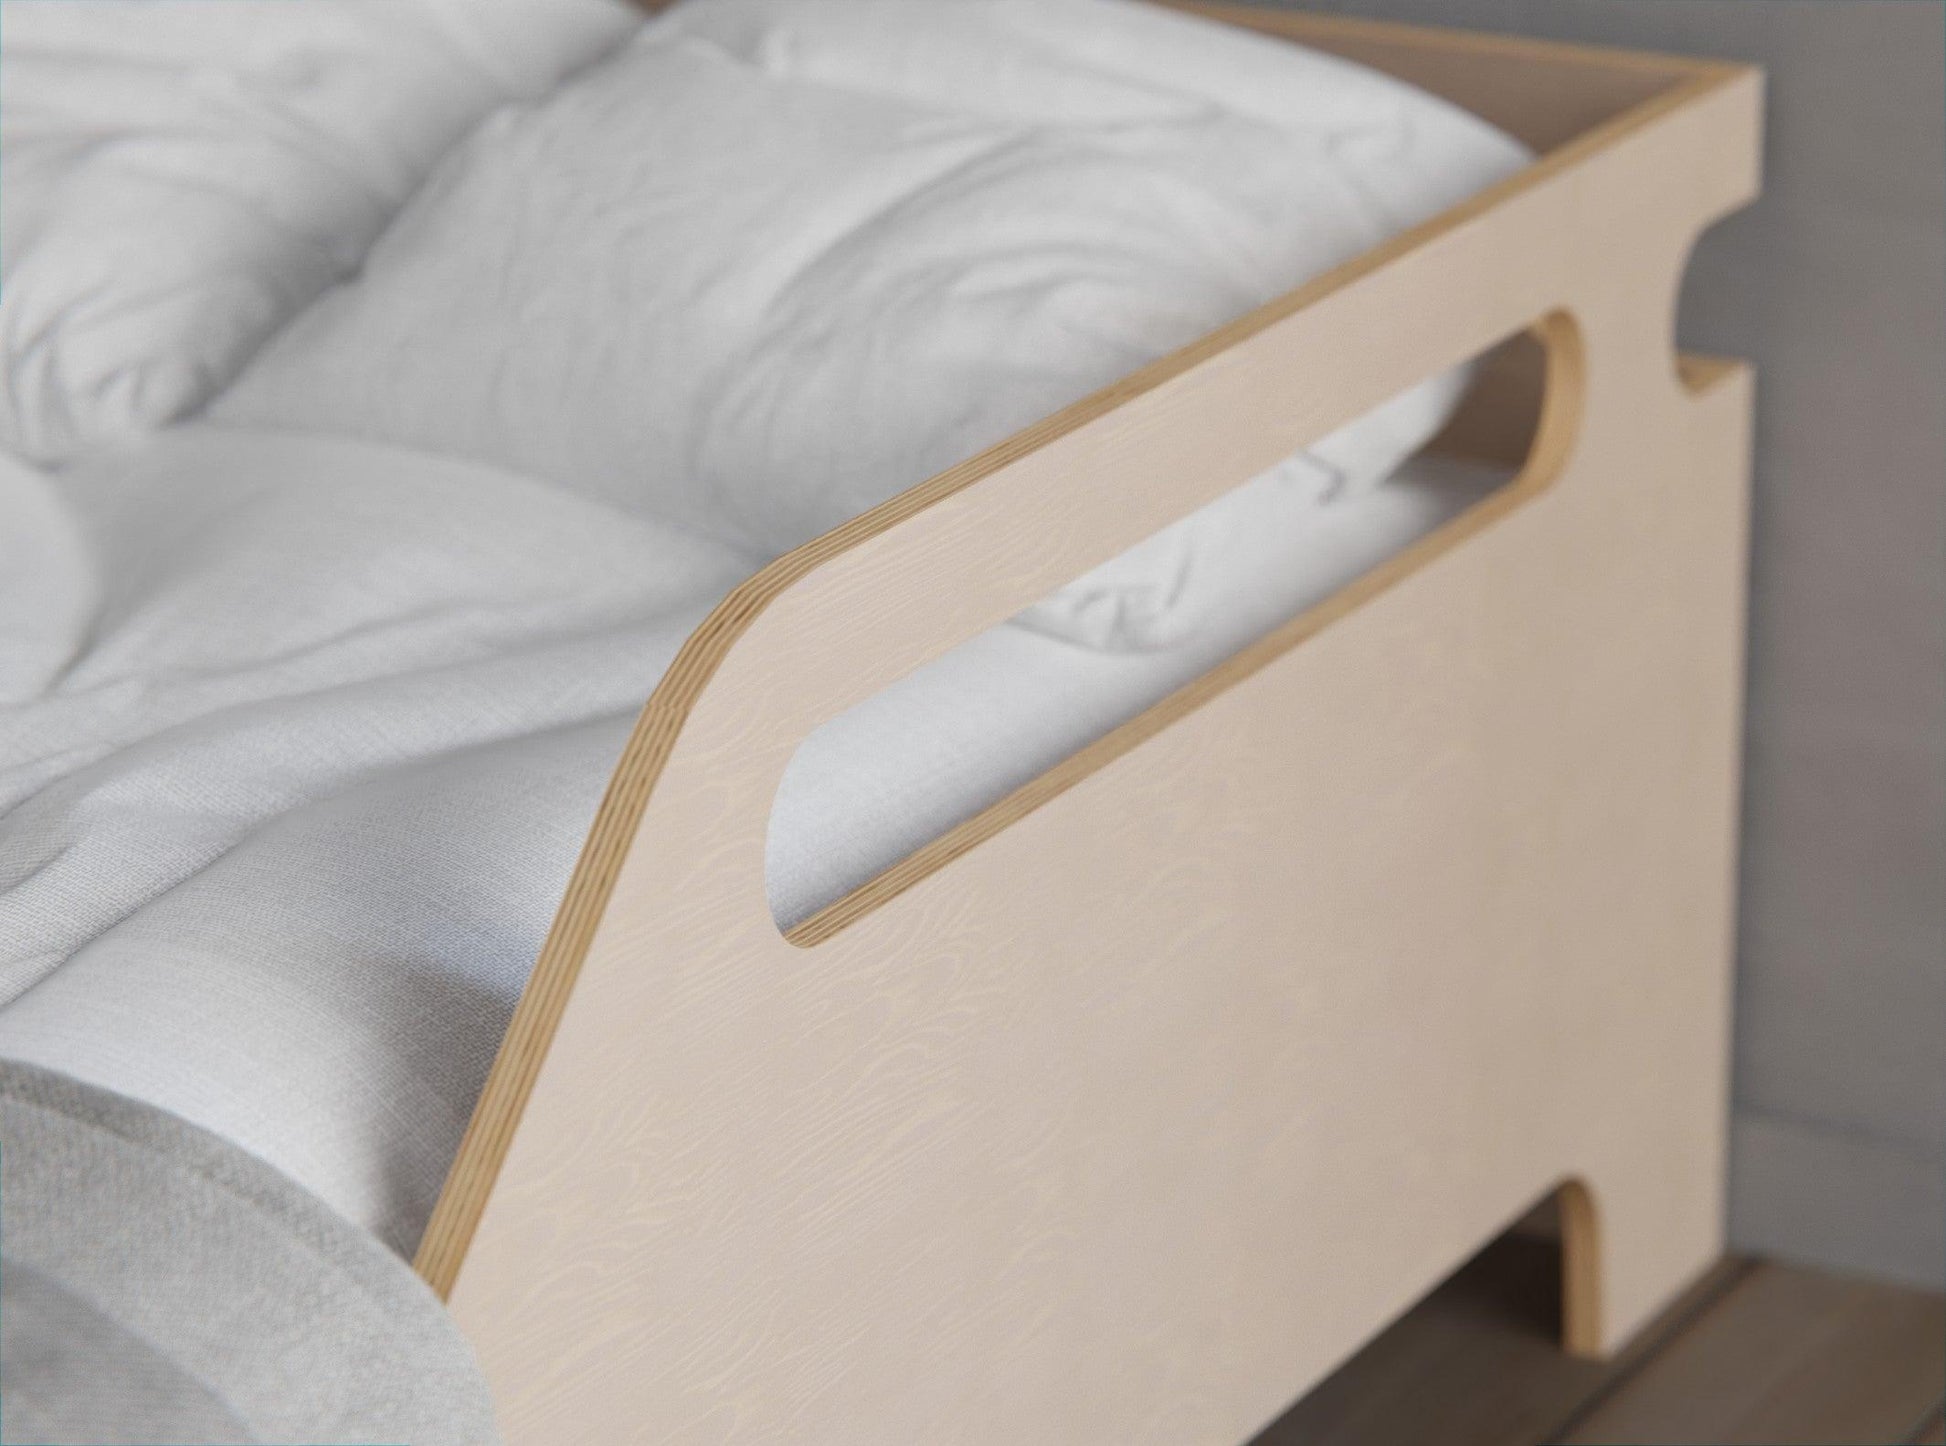 Plywood floor bed frame any size. New Zealand.